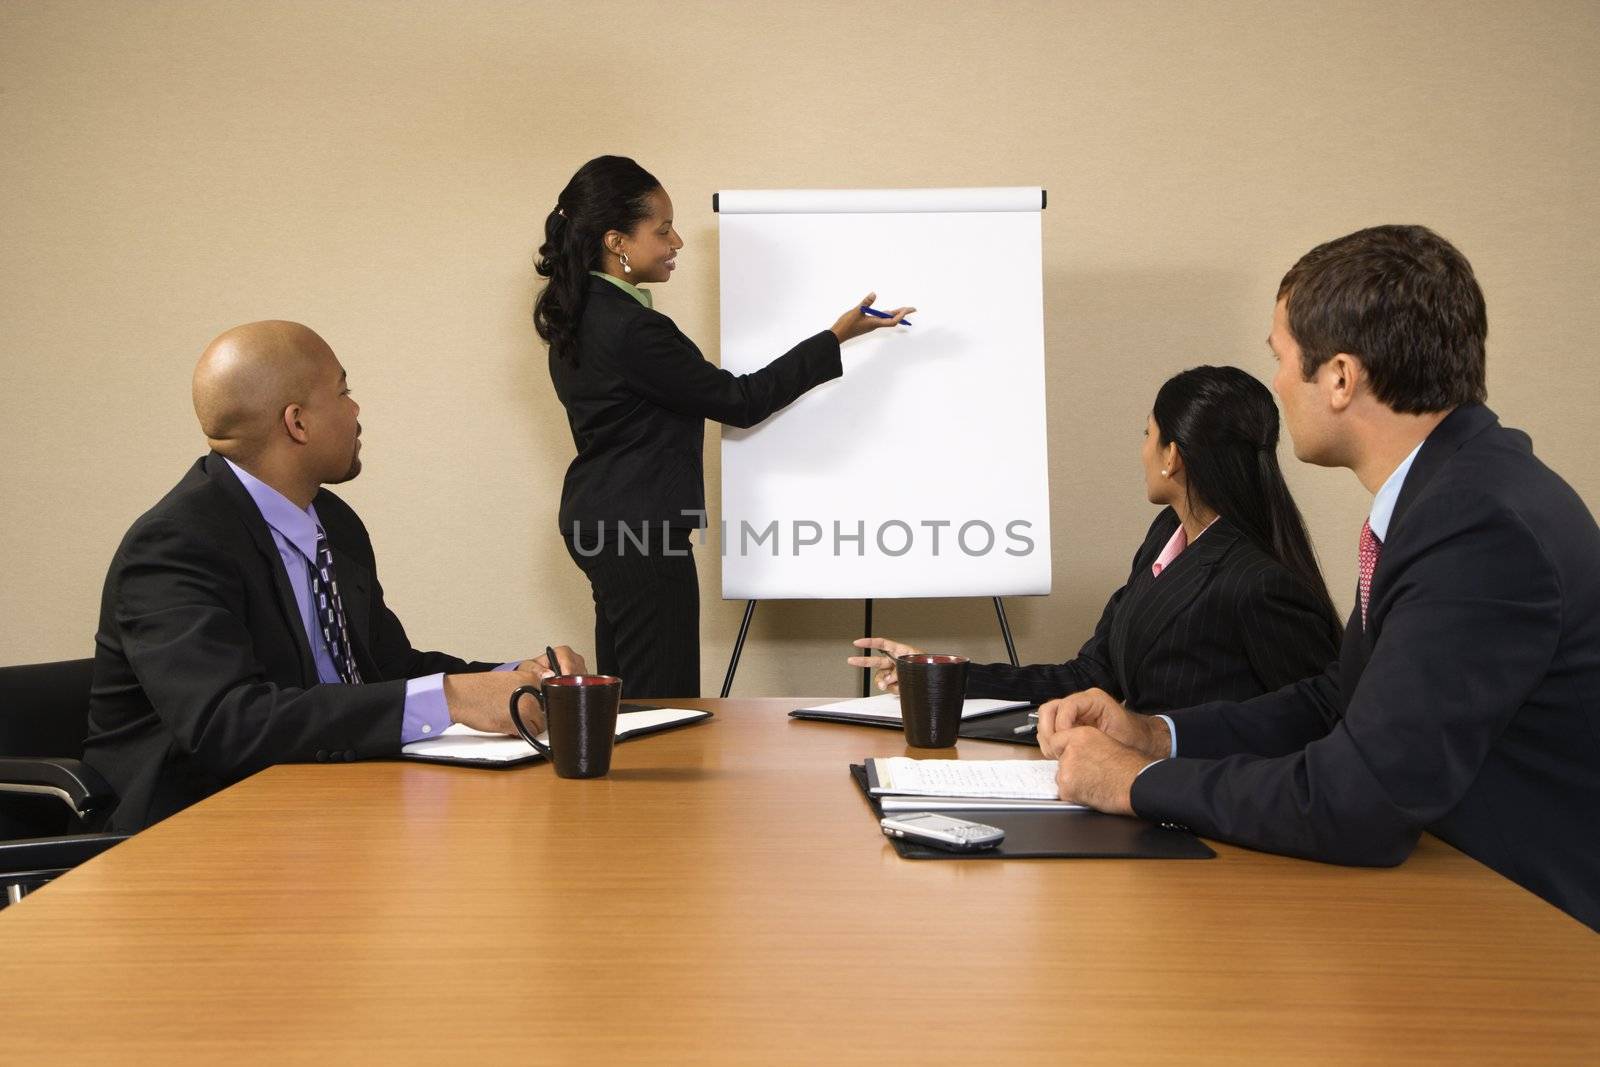 Businesspeople sitting at conference table while businesswoman gives presentation.